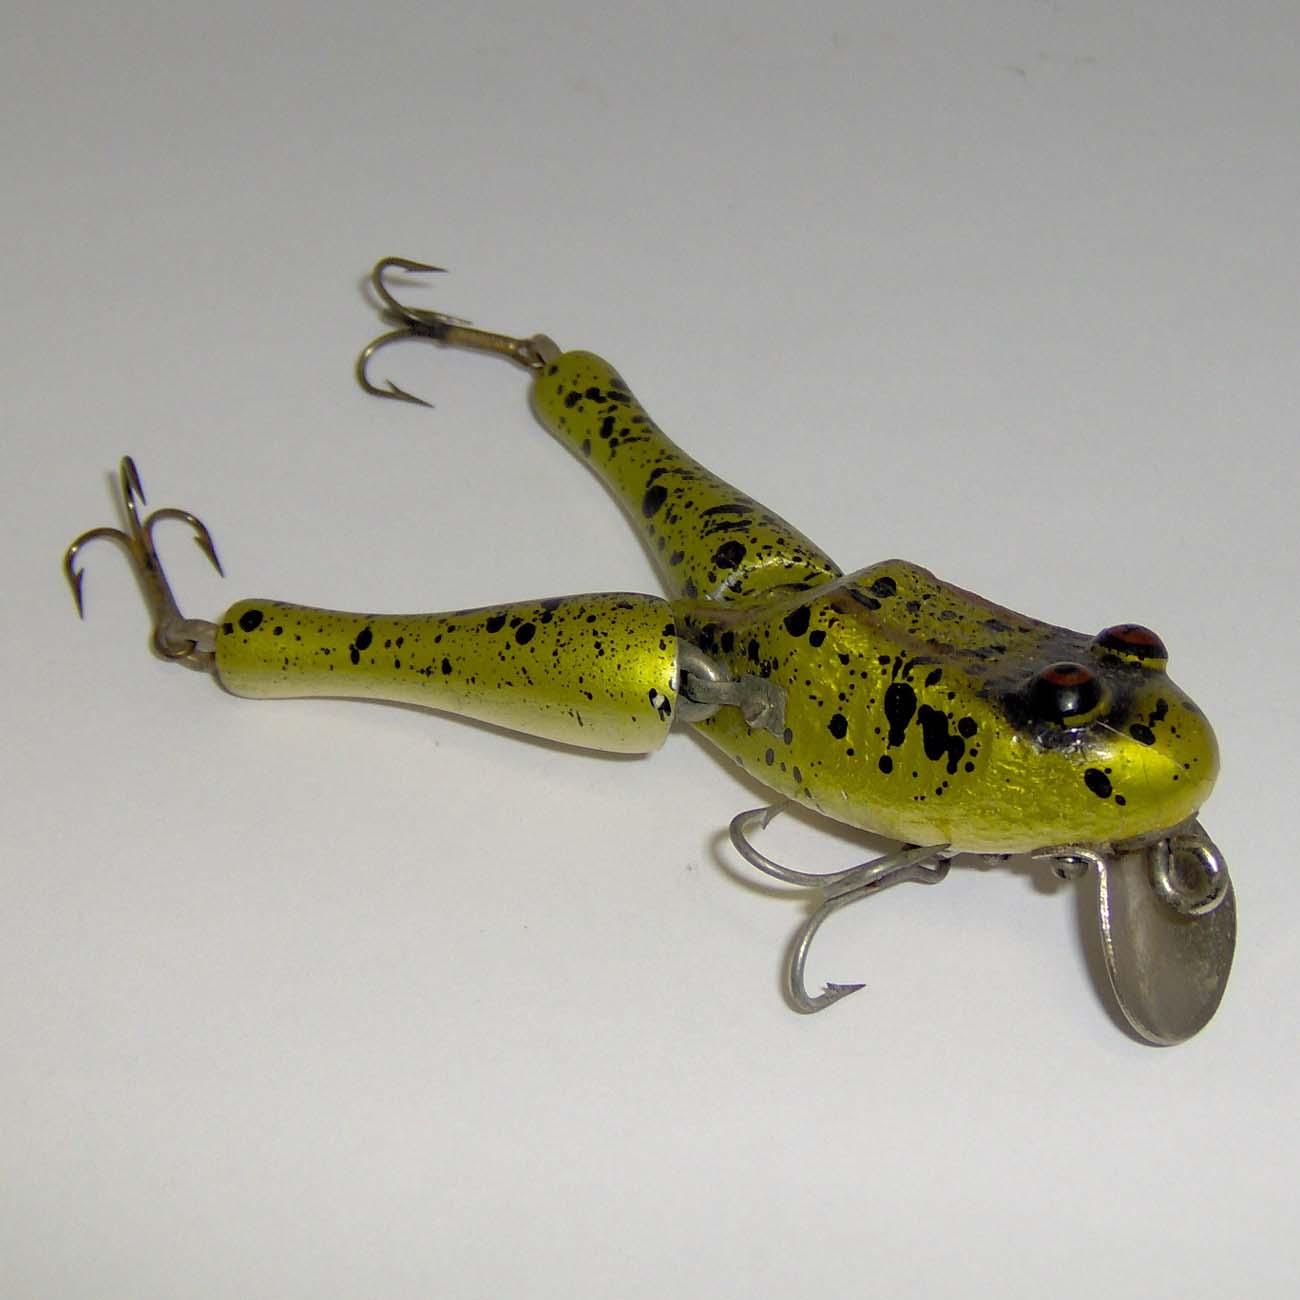 VINTAGE PAW PAW BAIT CO. WOTTA FROG WOOD FISHING LURE - REALLY COOL! —  Steemit